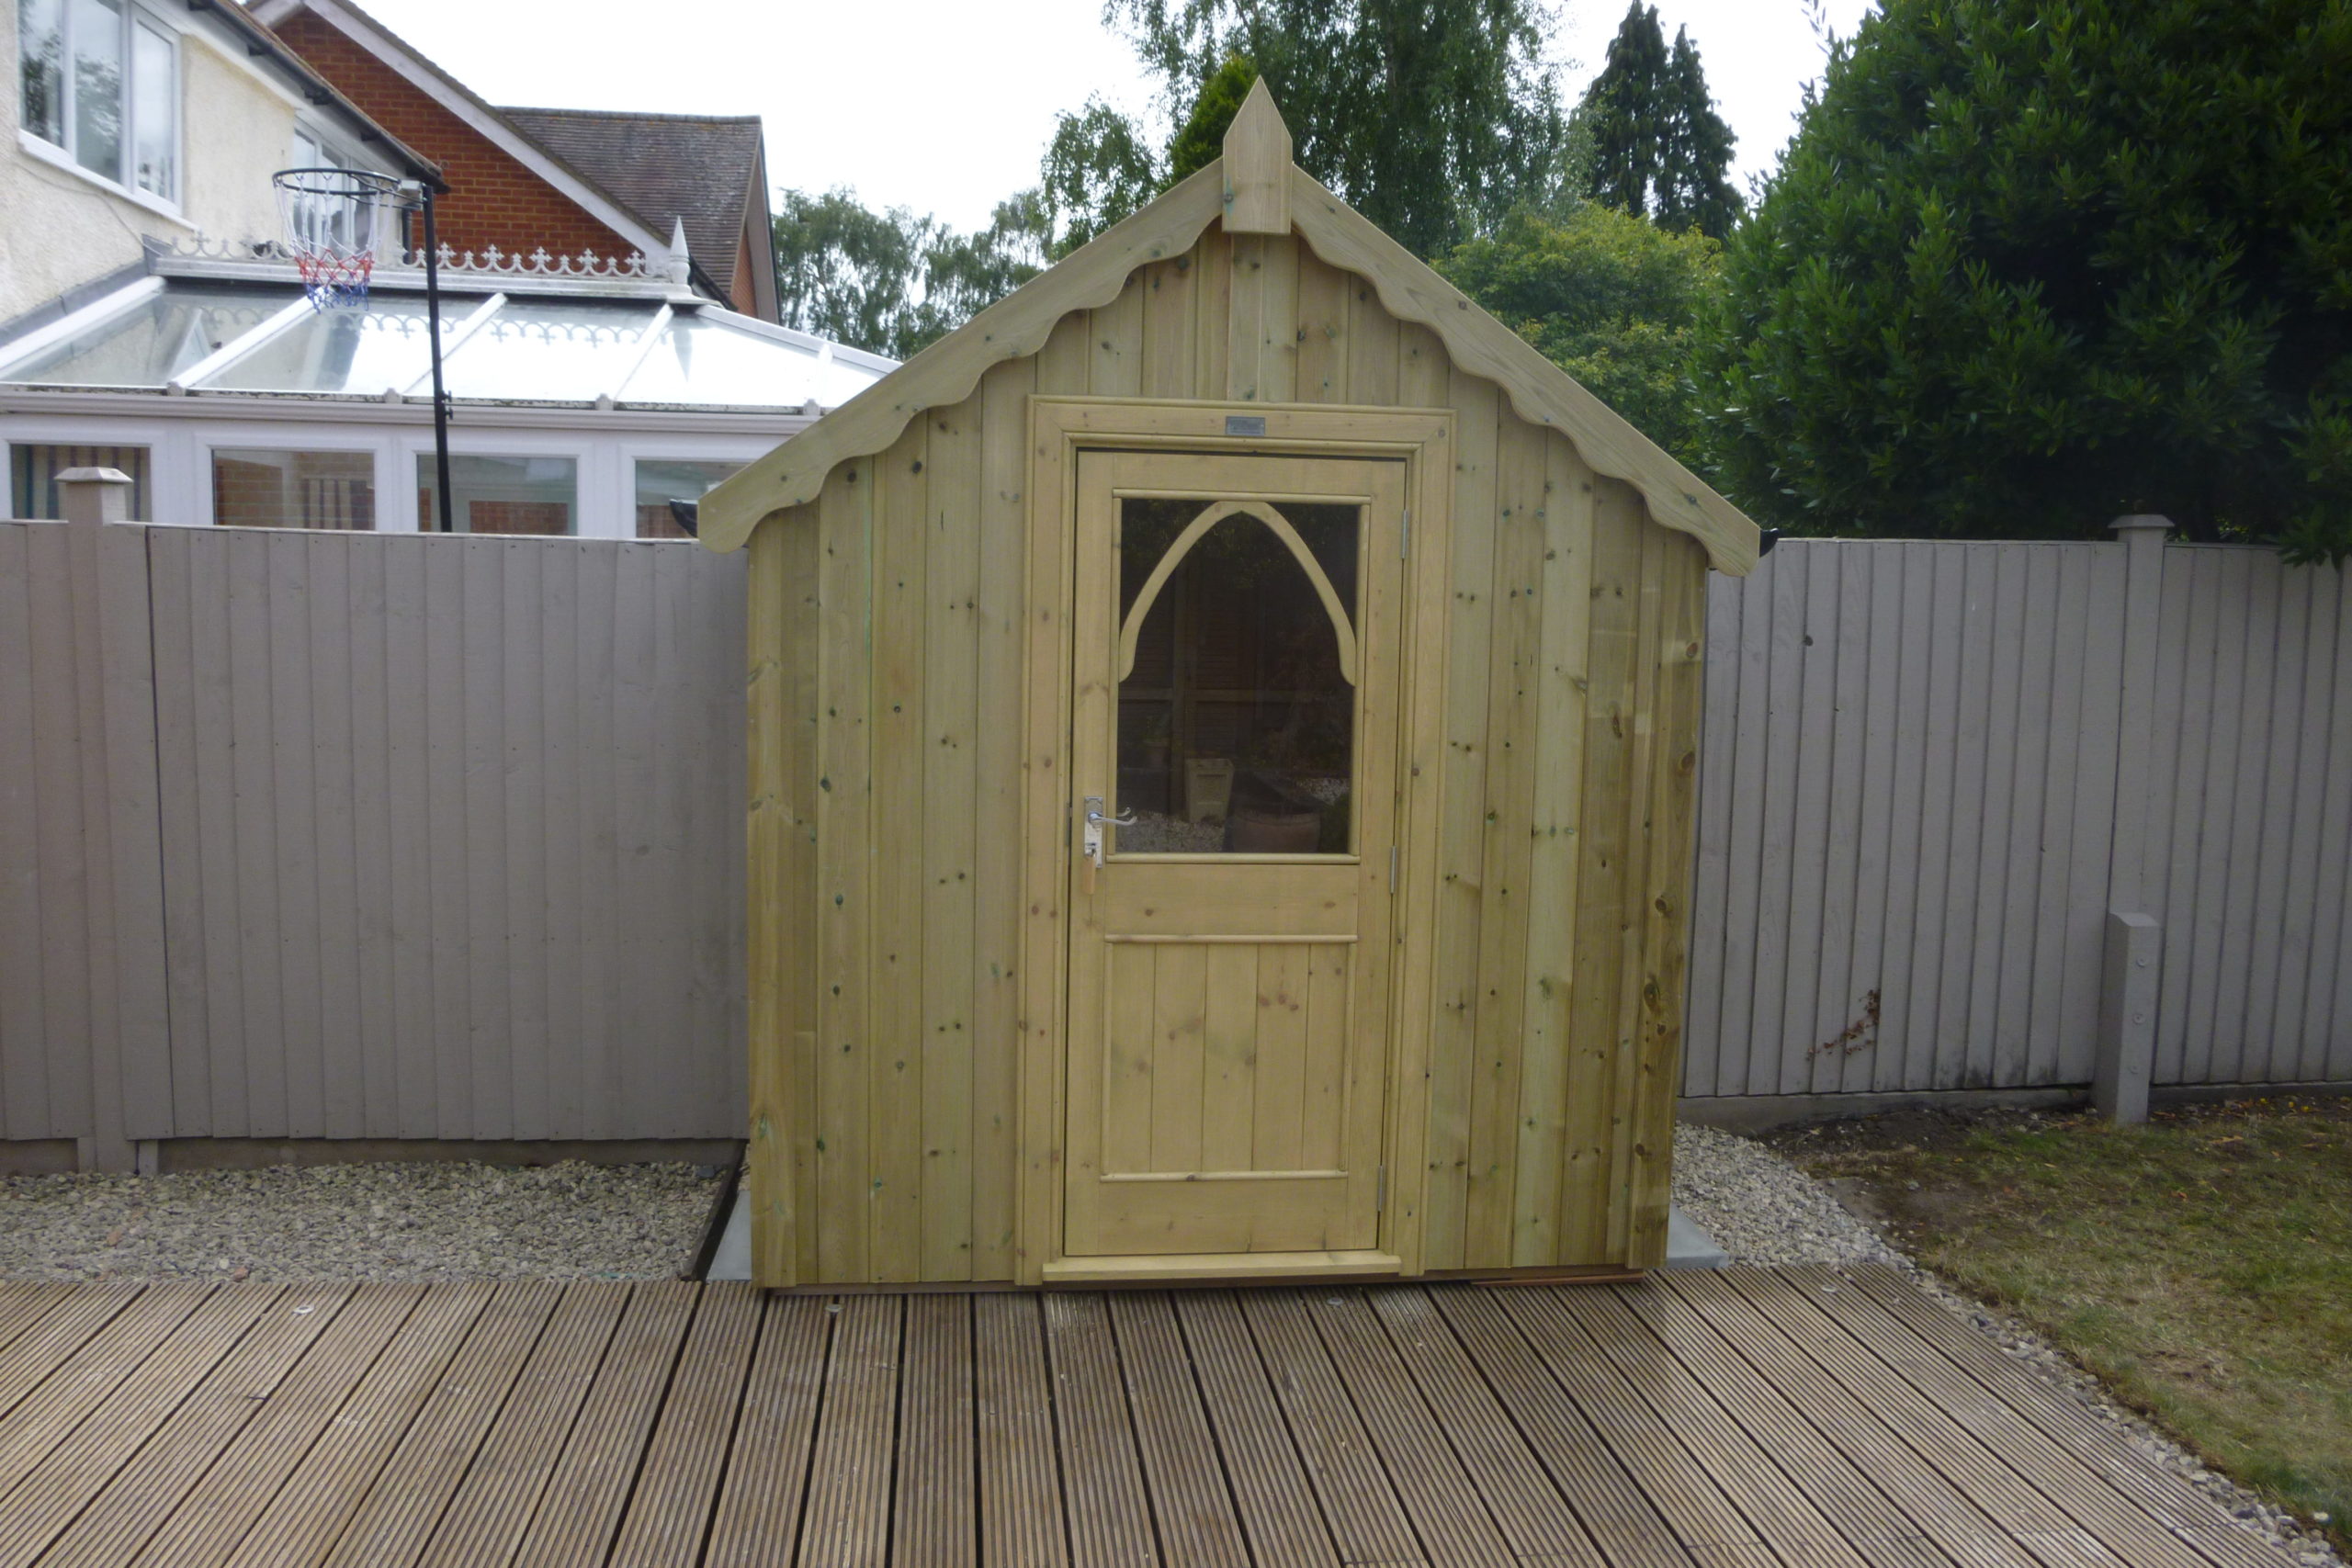 Kensington Shed is great for hobbies needing a smaller space
